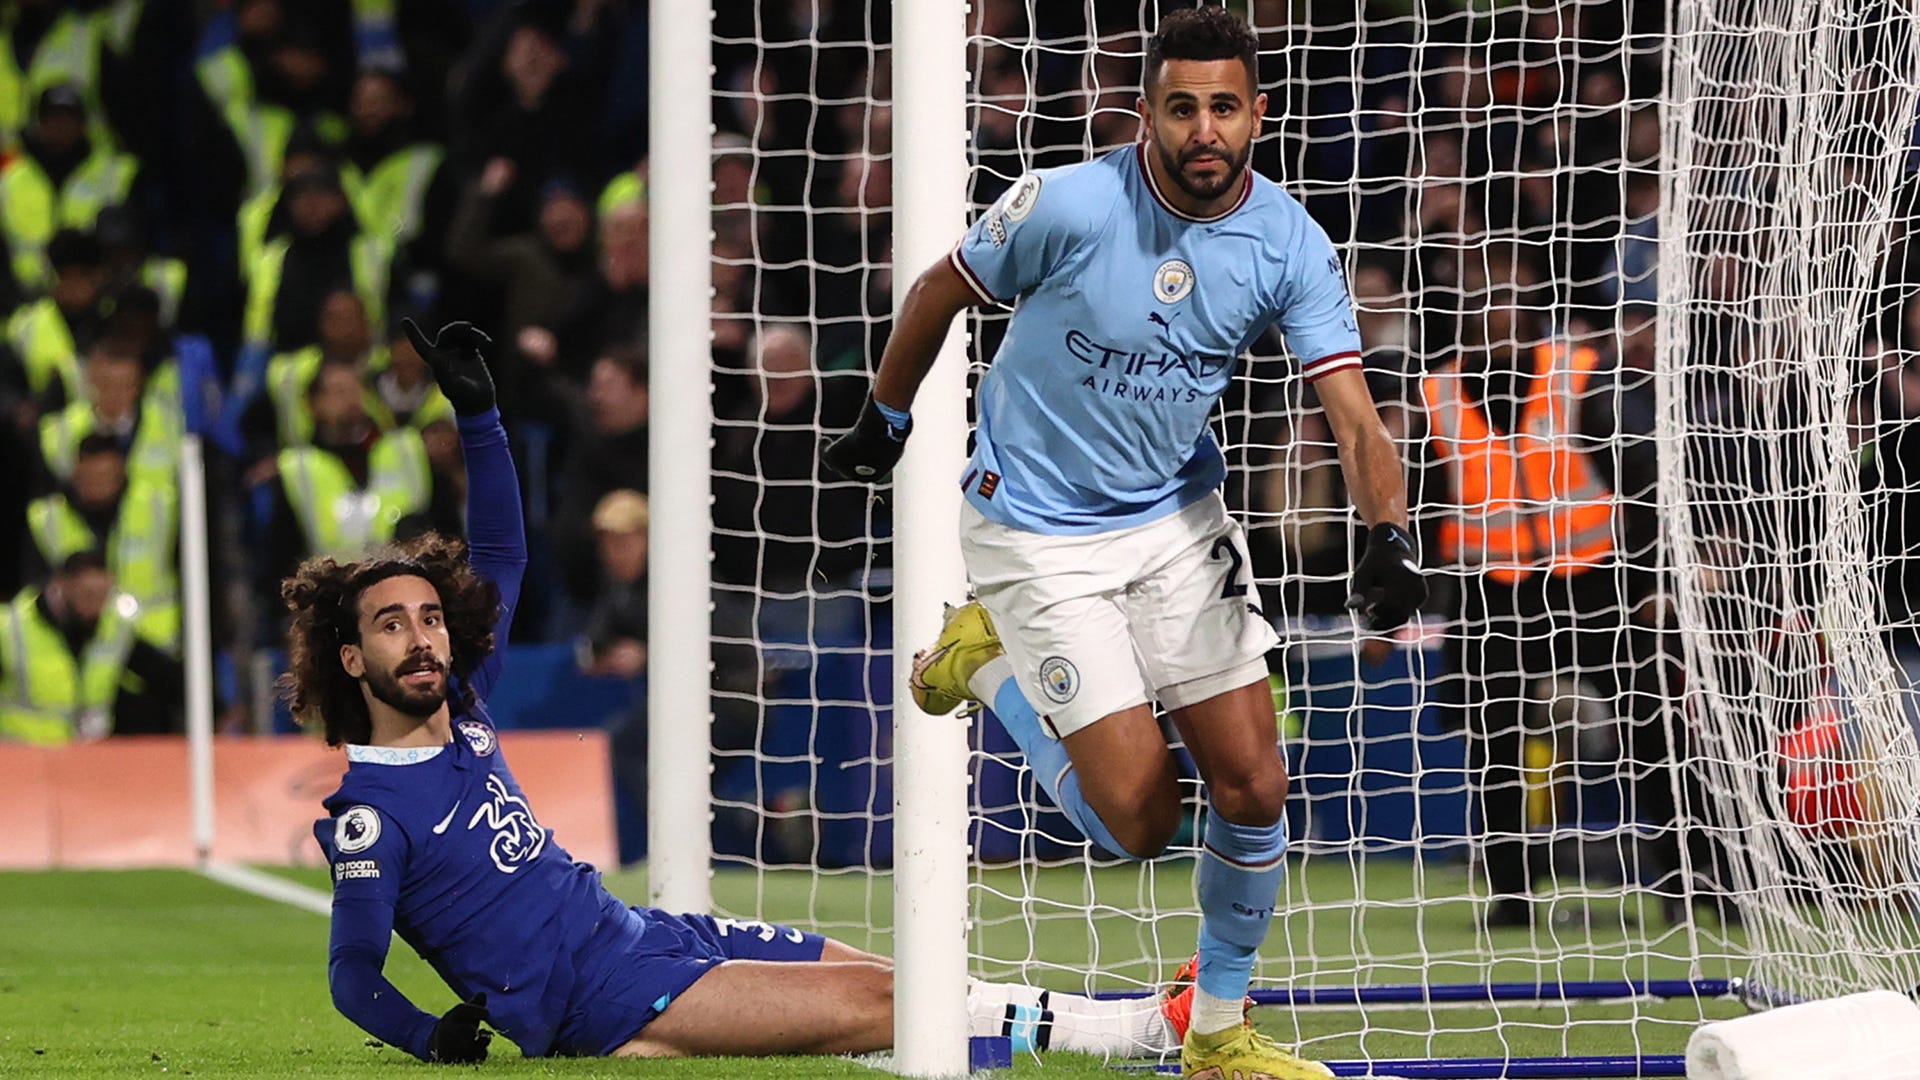 Manchester City vs Chelsea Live stream, TV channel, kick-off time and where to watch Goal UK